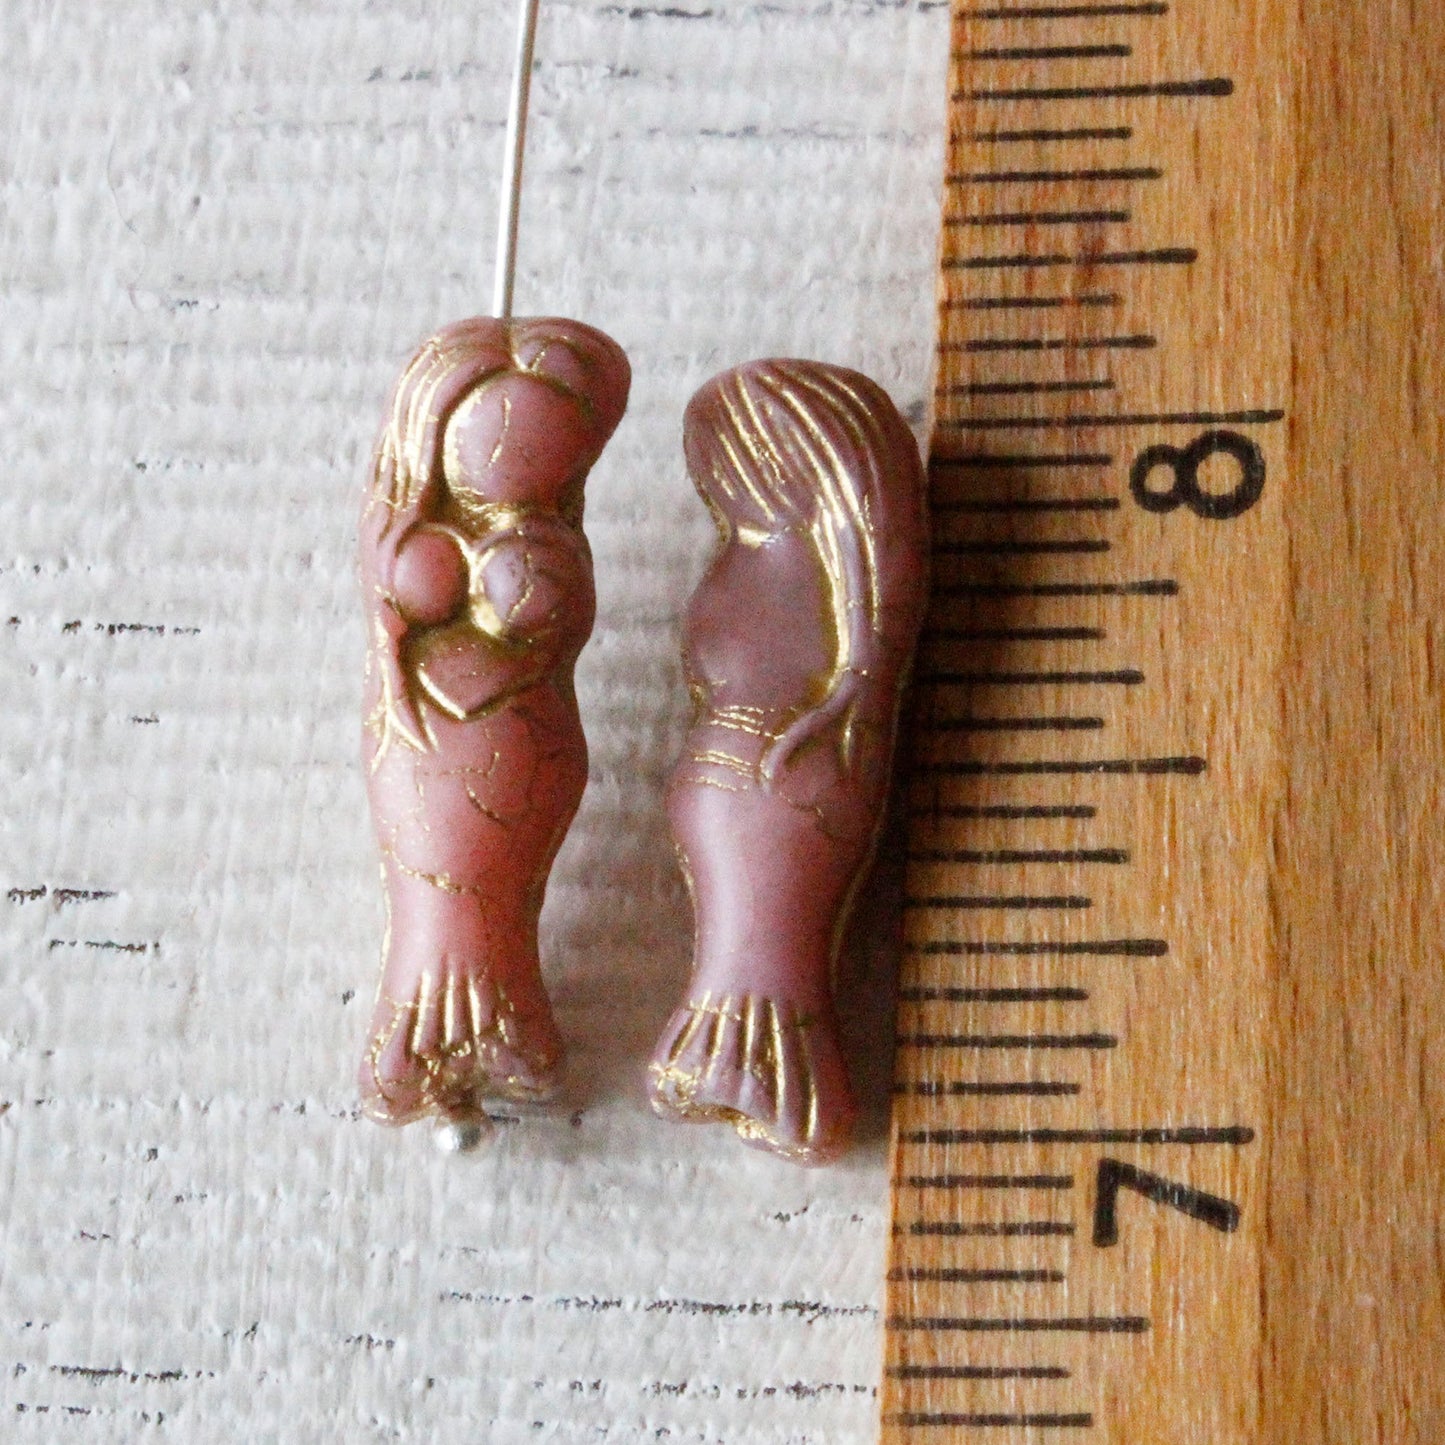 5x25mm Glass Mermaid Beads - Opaque Pink Rose Gold Wash